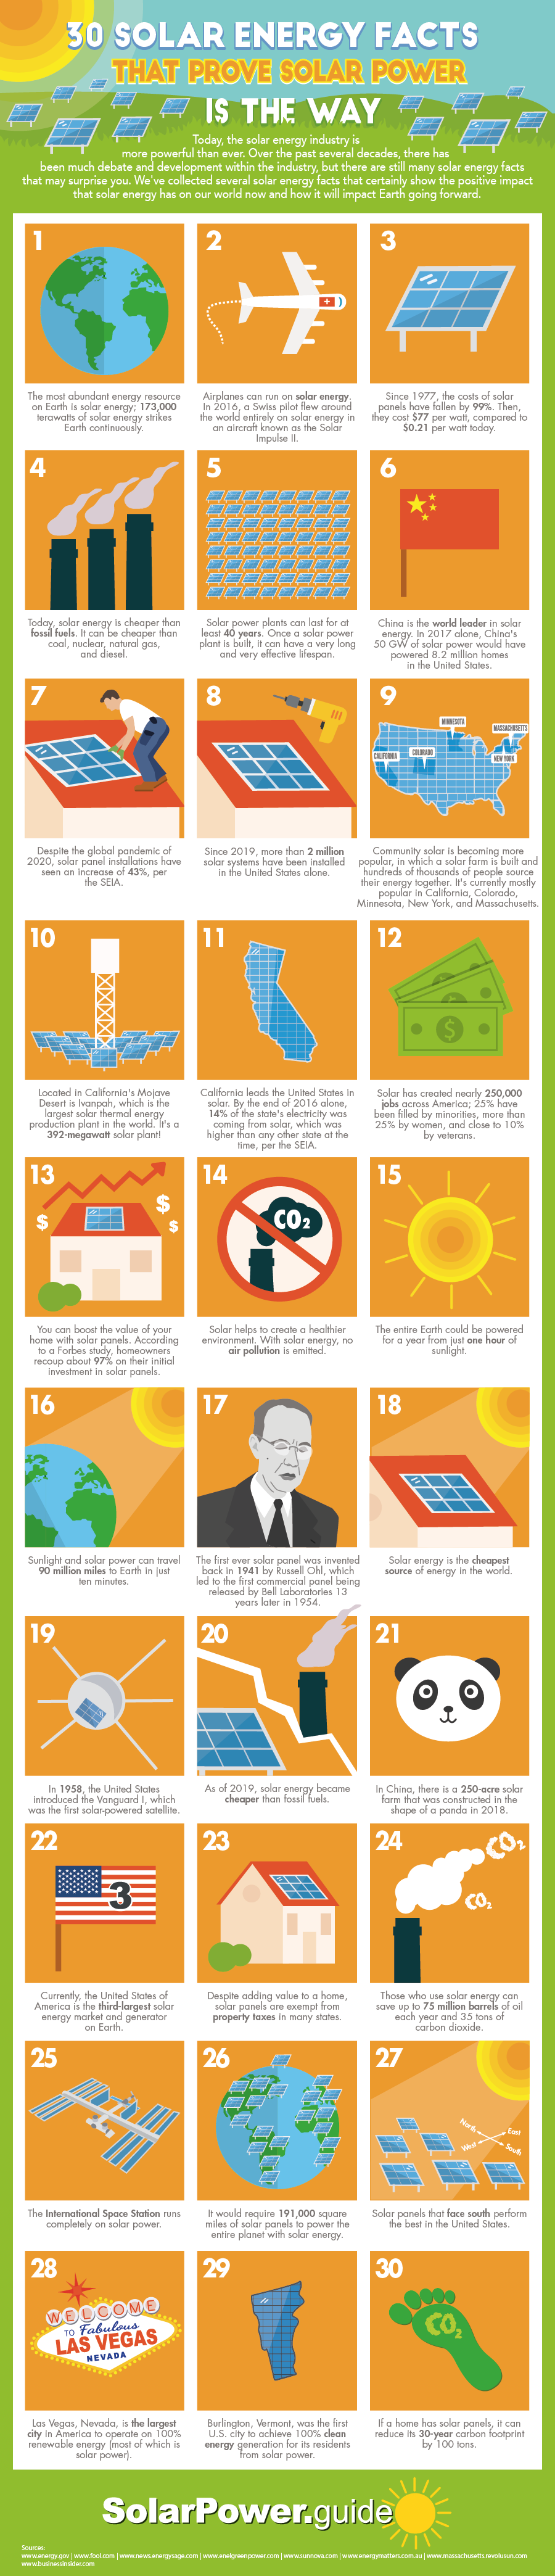 30 Solar Energy Facts That Prove Solar Power is the Way - Solar Power Guide - Infographic